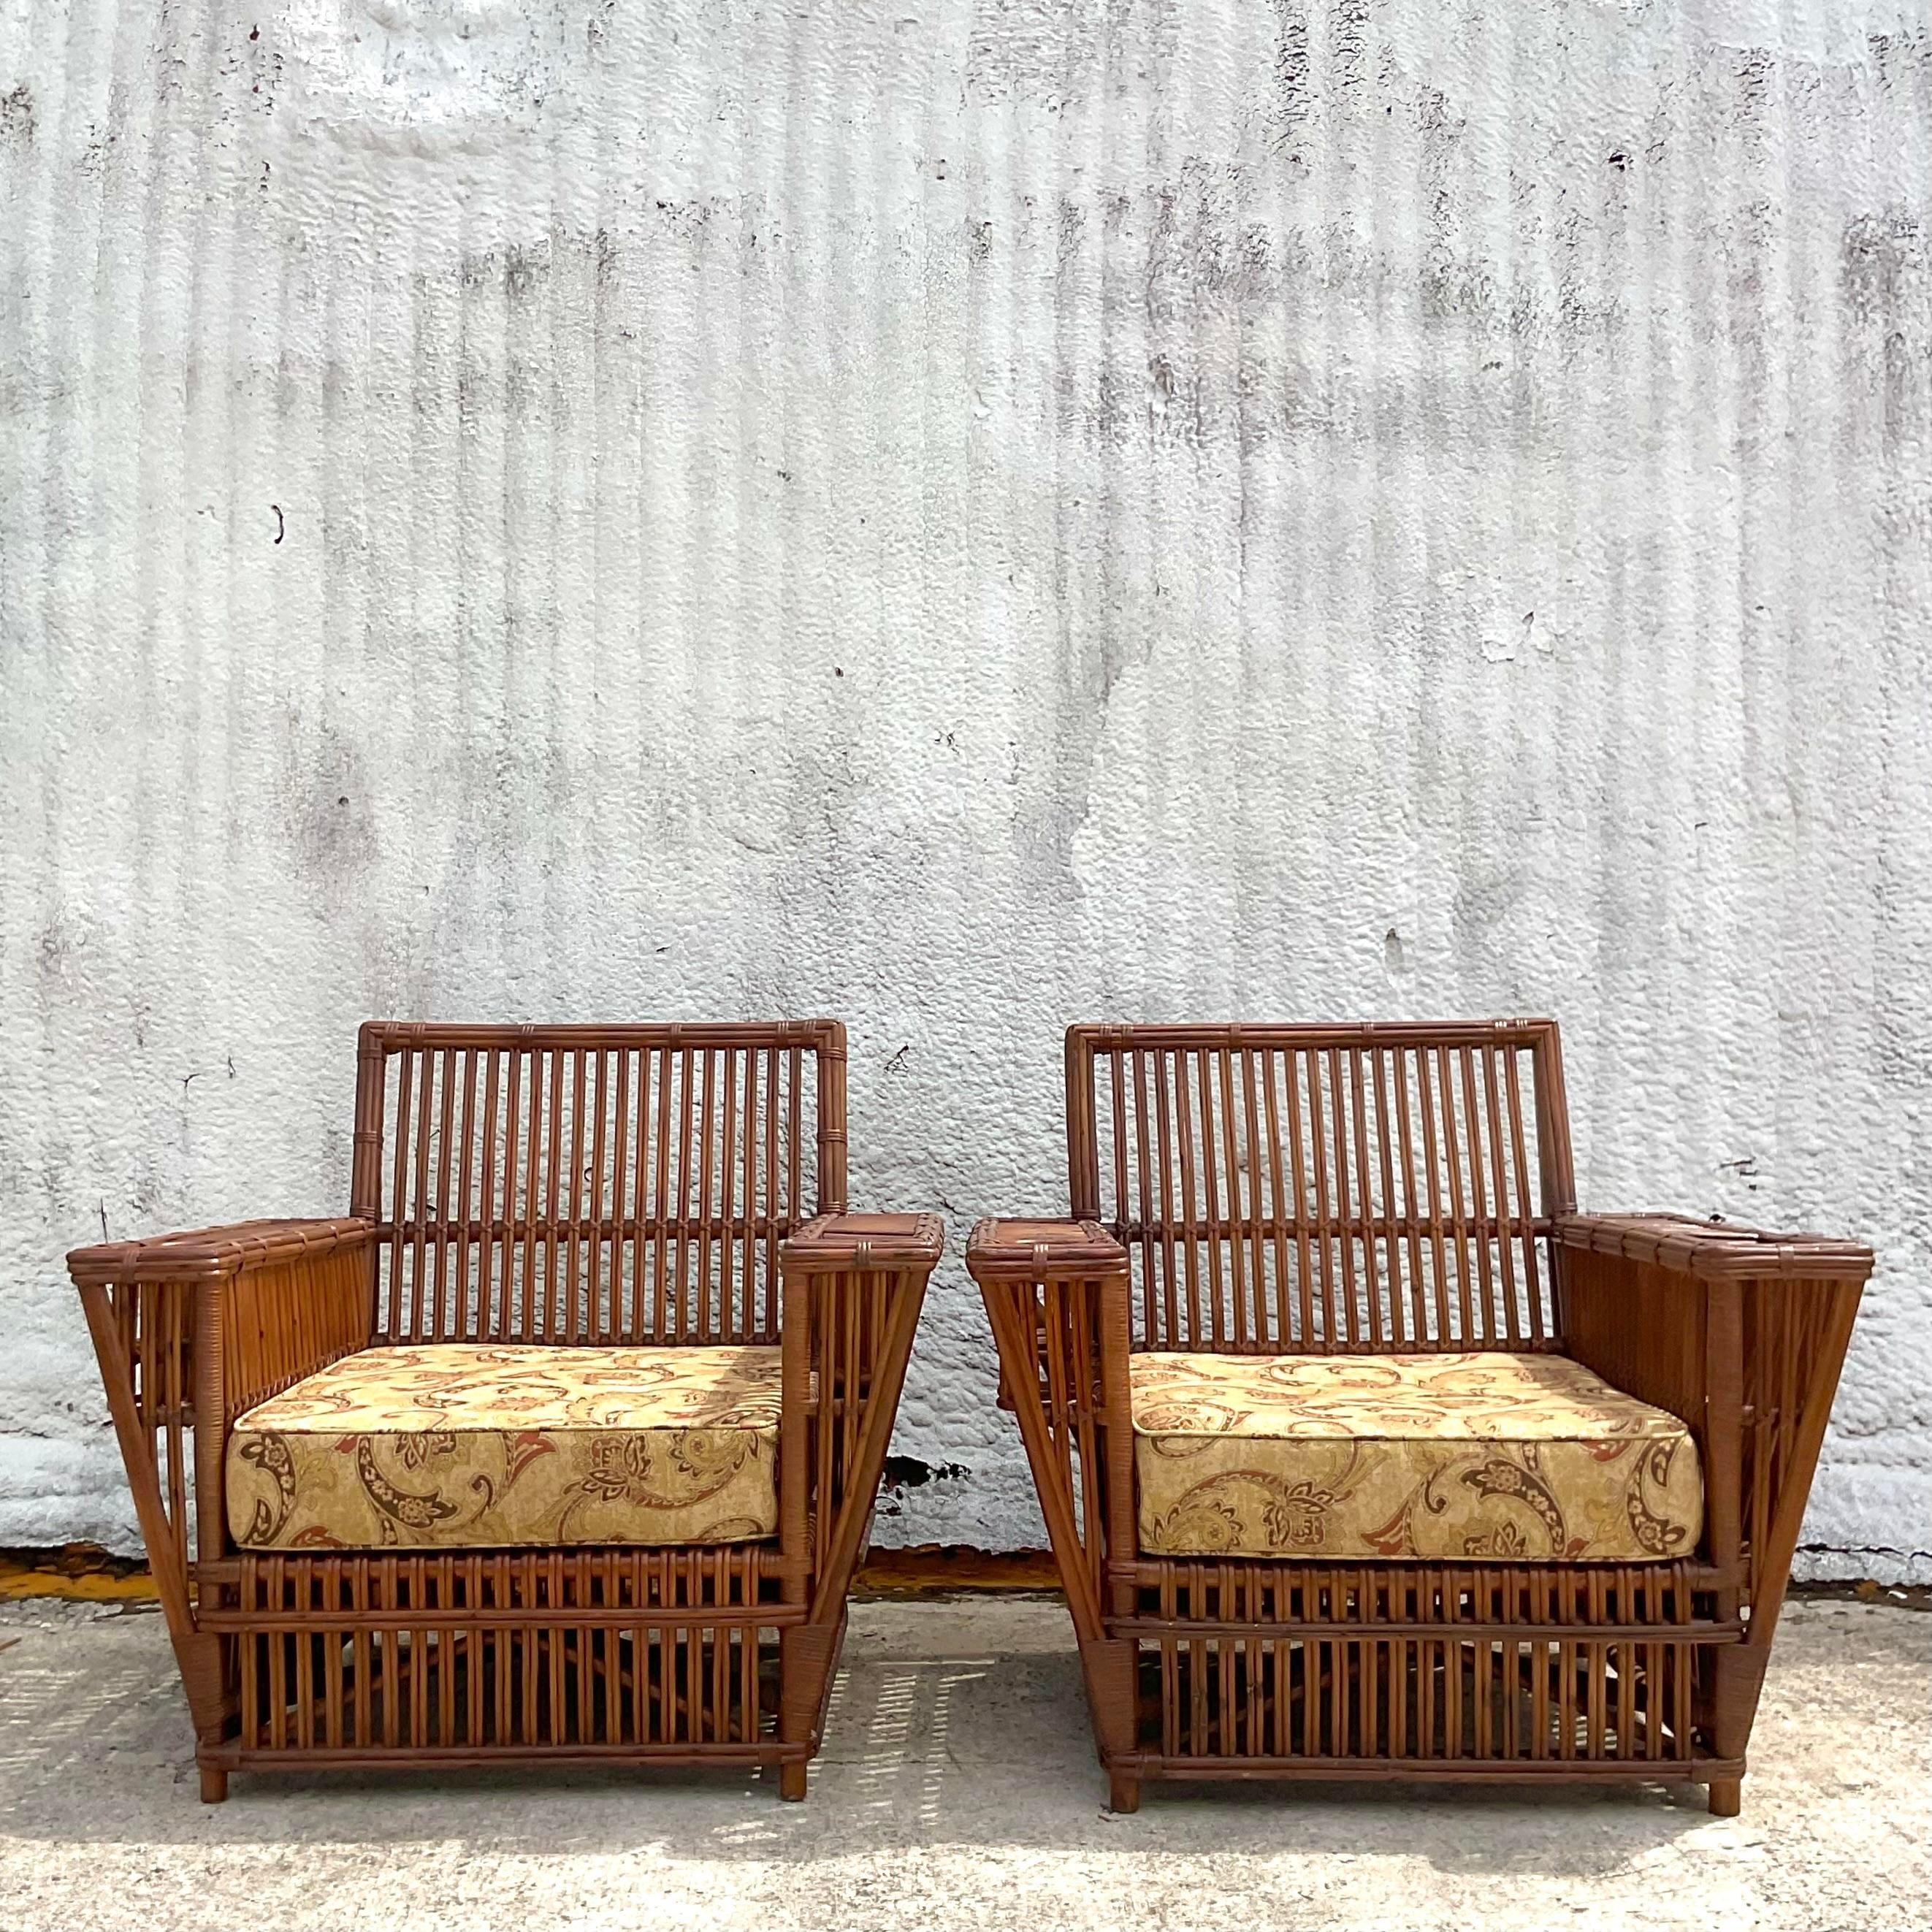 20th Century Vintage Coastal Stick Rattan Lounge Chairs After Bielecky Brothers - a Pair